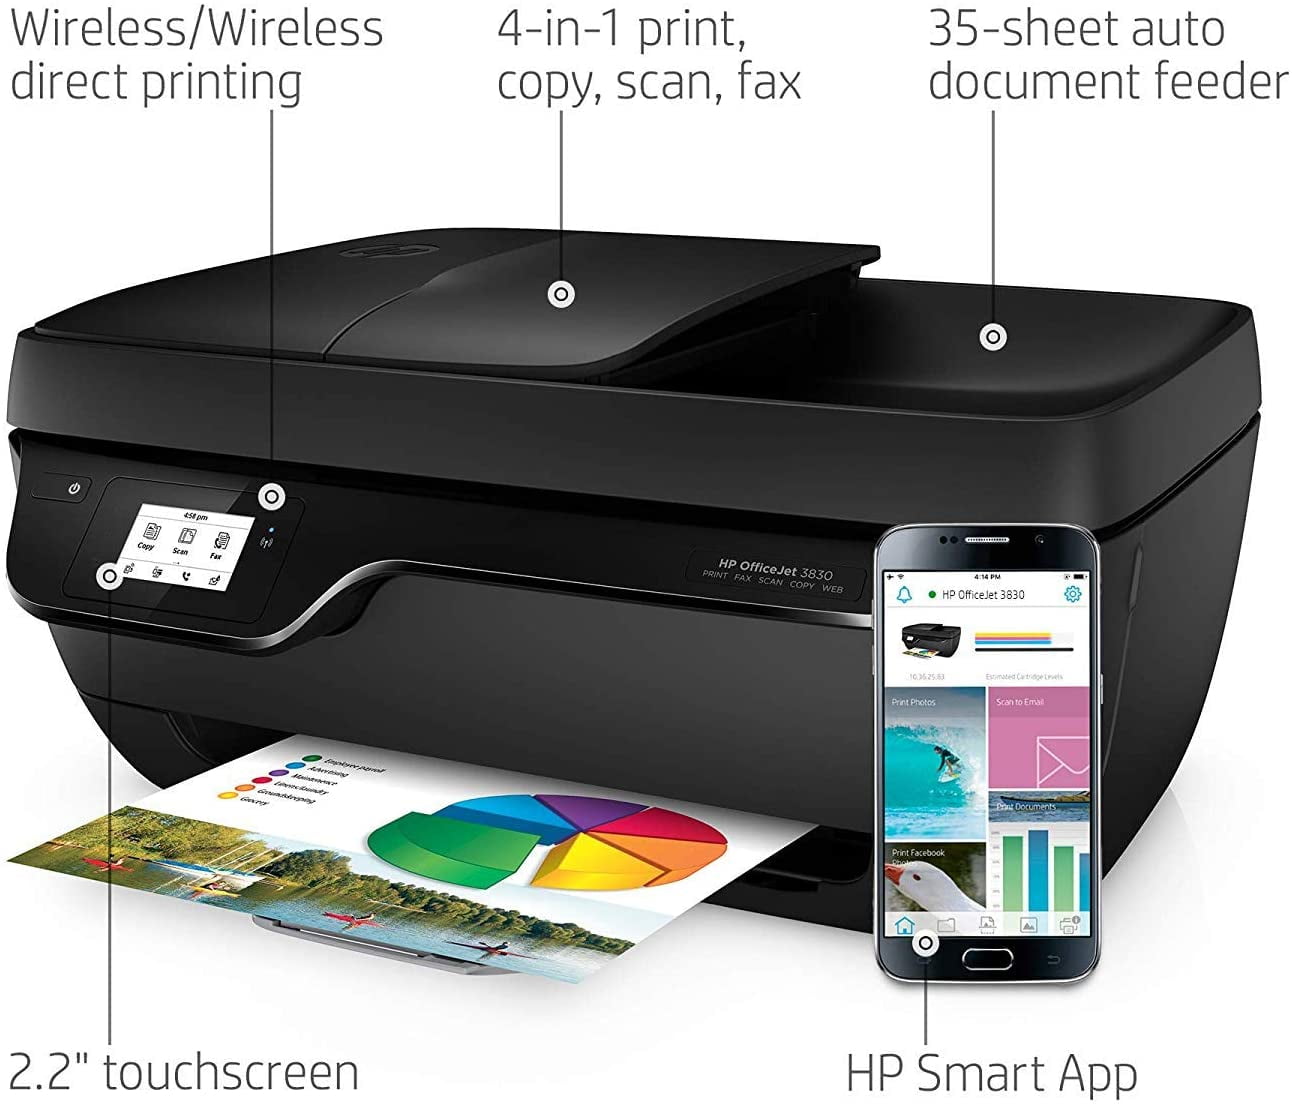 HP OfficeJet 3830 All-in-One Wireless Printer : print, copy,scan, fax (K7V40A)